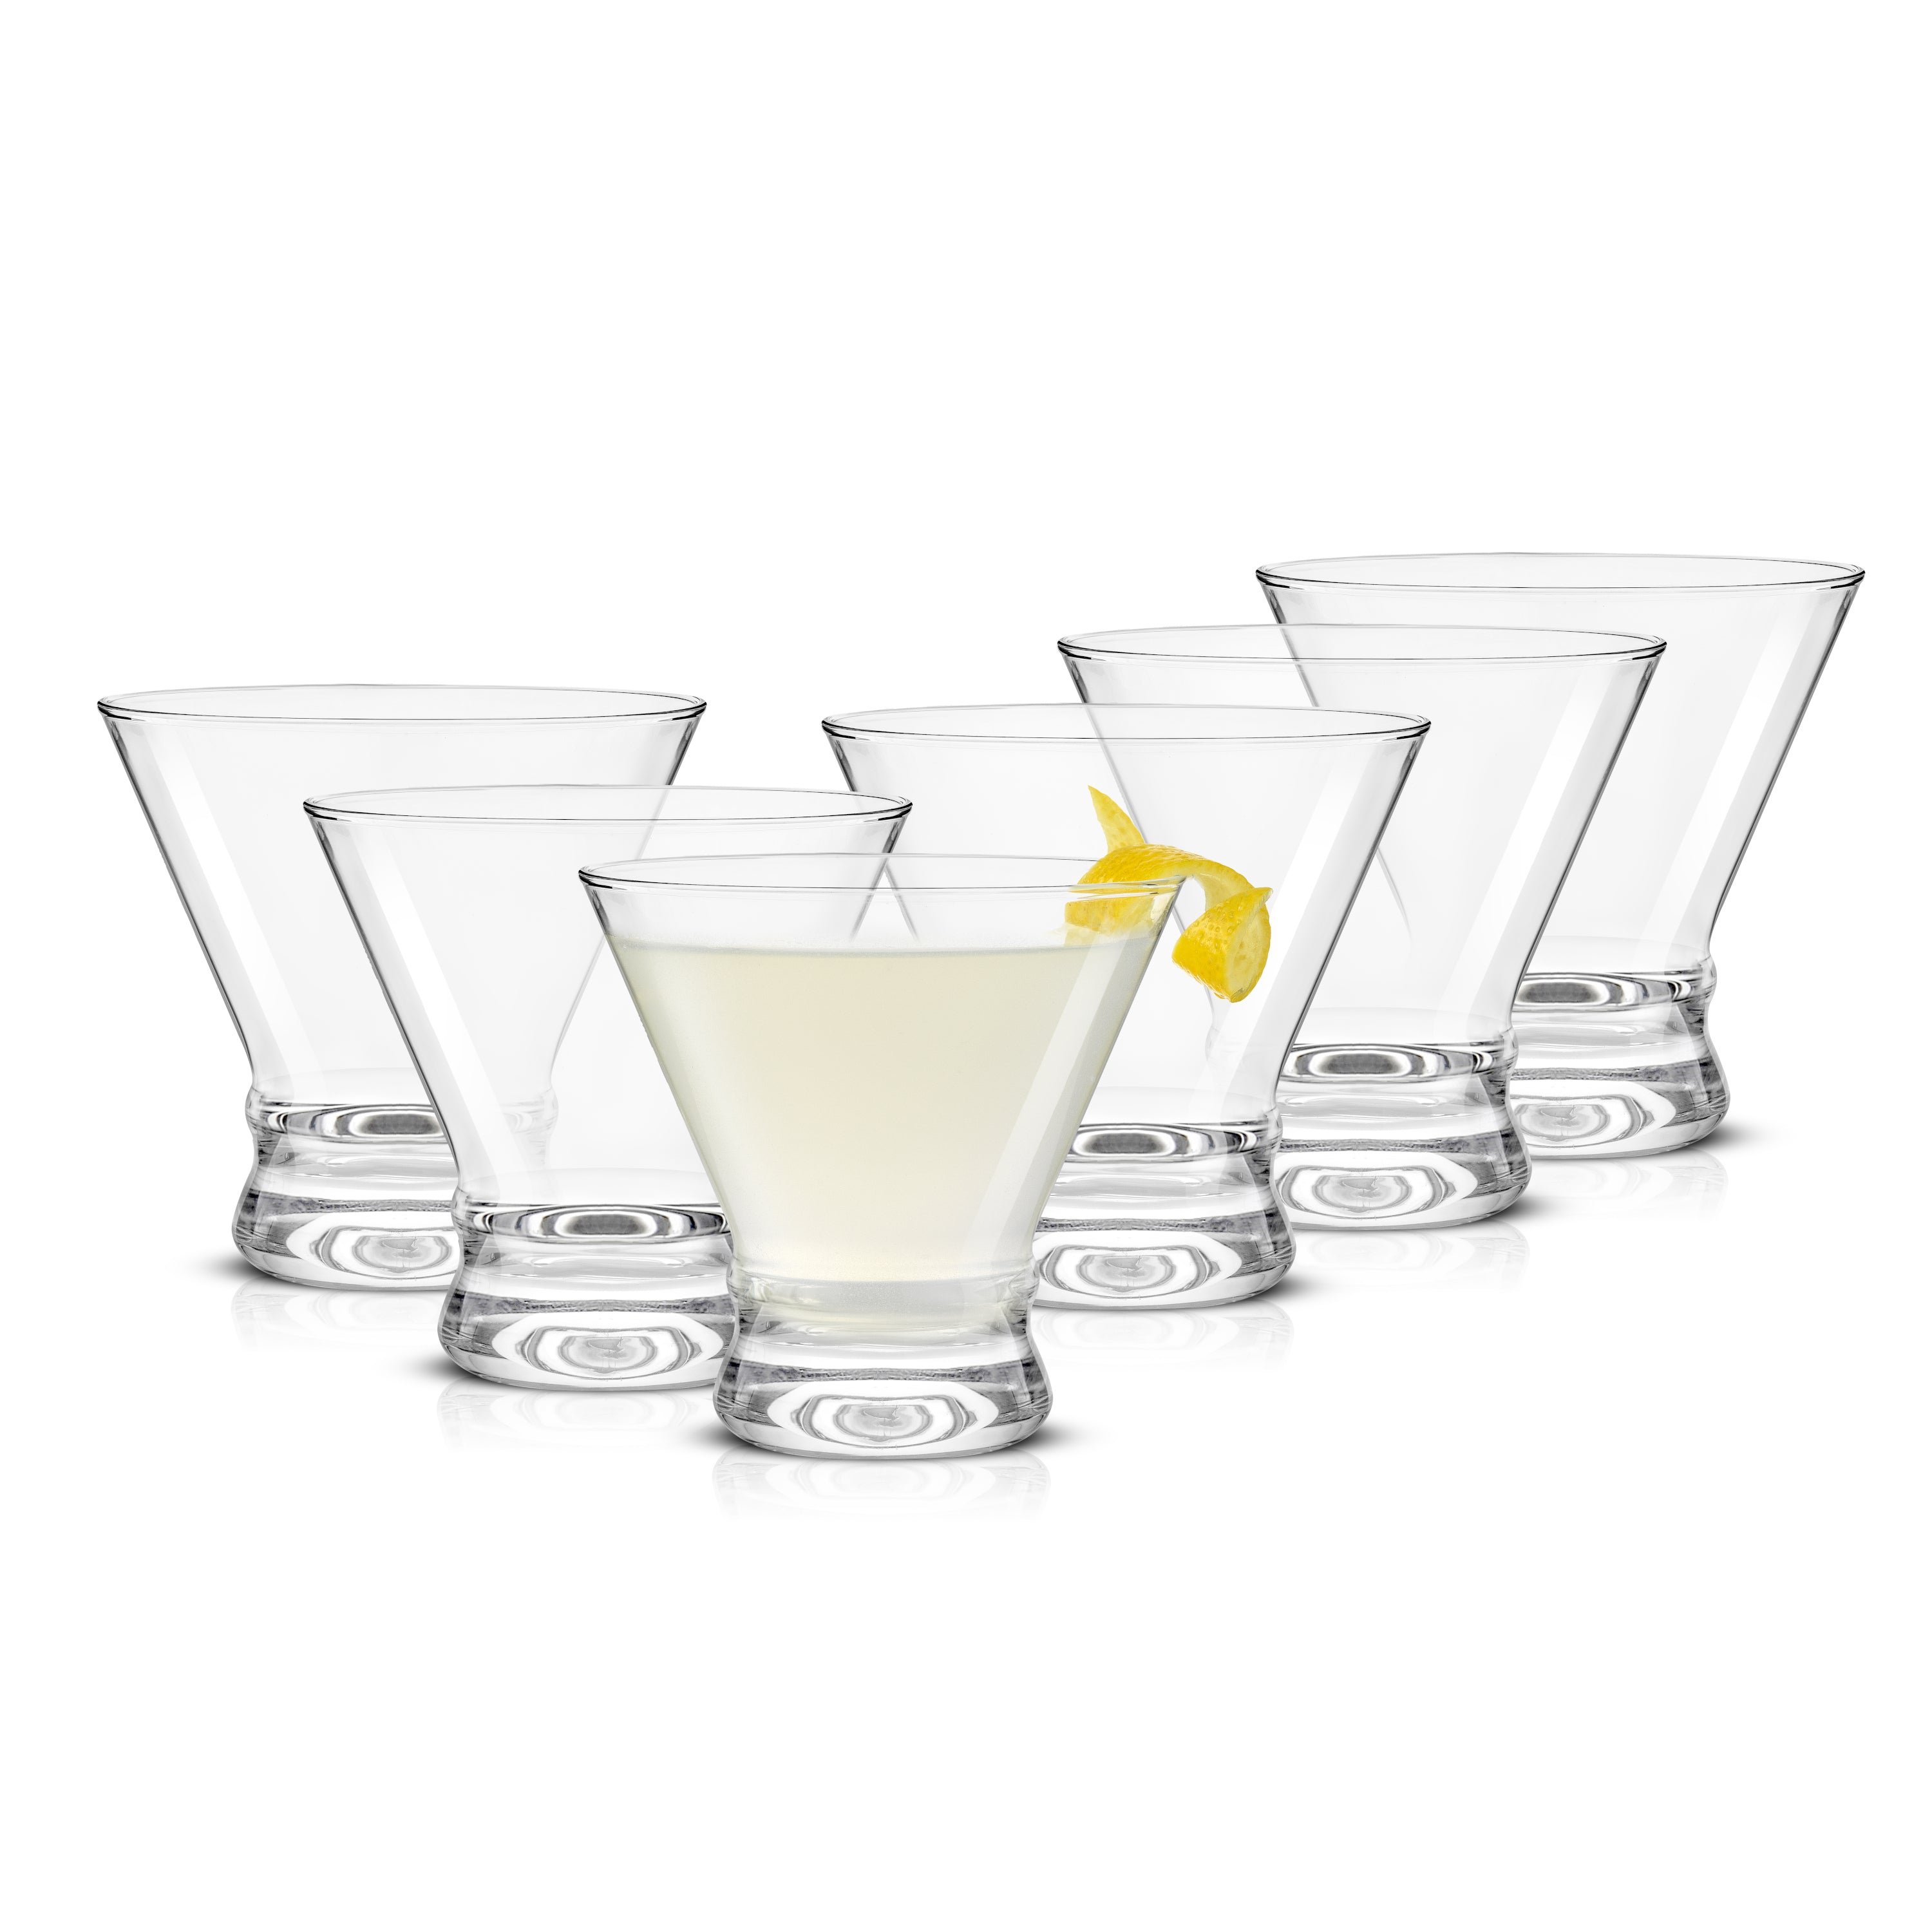 PARNOO Cocktail Glasses 8 Ounce - Set of 8 Seamless Cosmopolitan, Martini  Glasses with Heavy Base – …See more PARNOO Cocktail Glasses 8 Ounce - Set  of